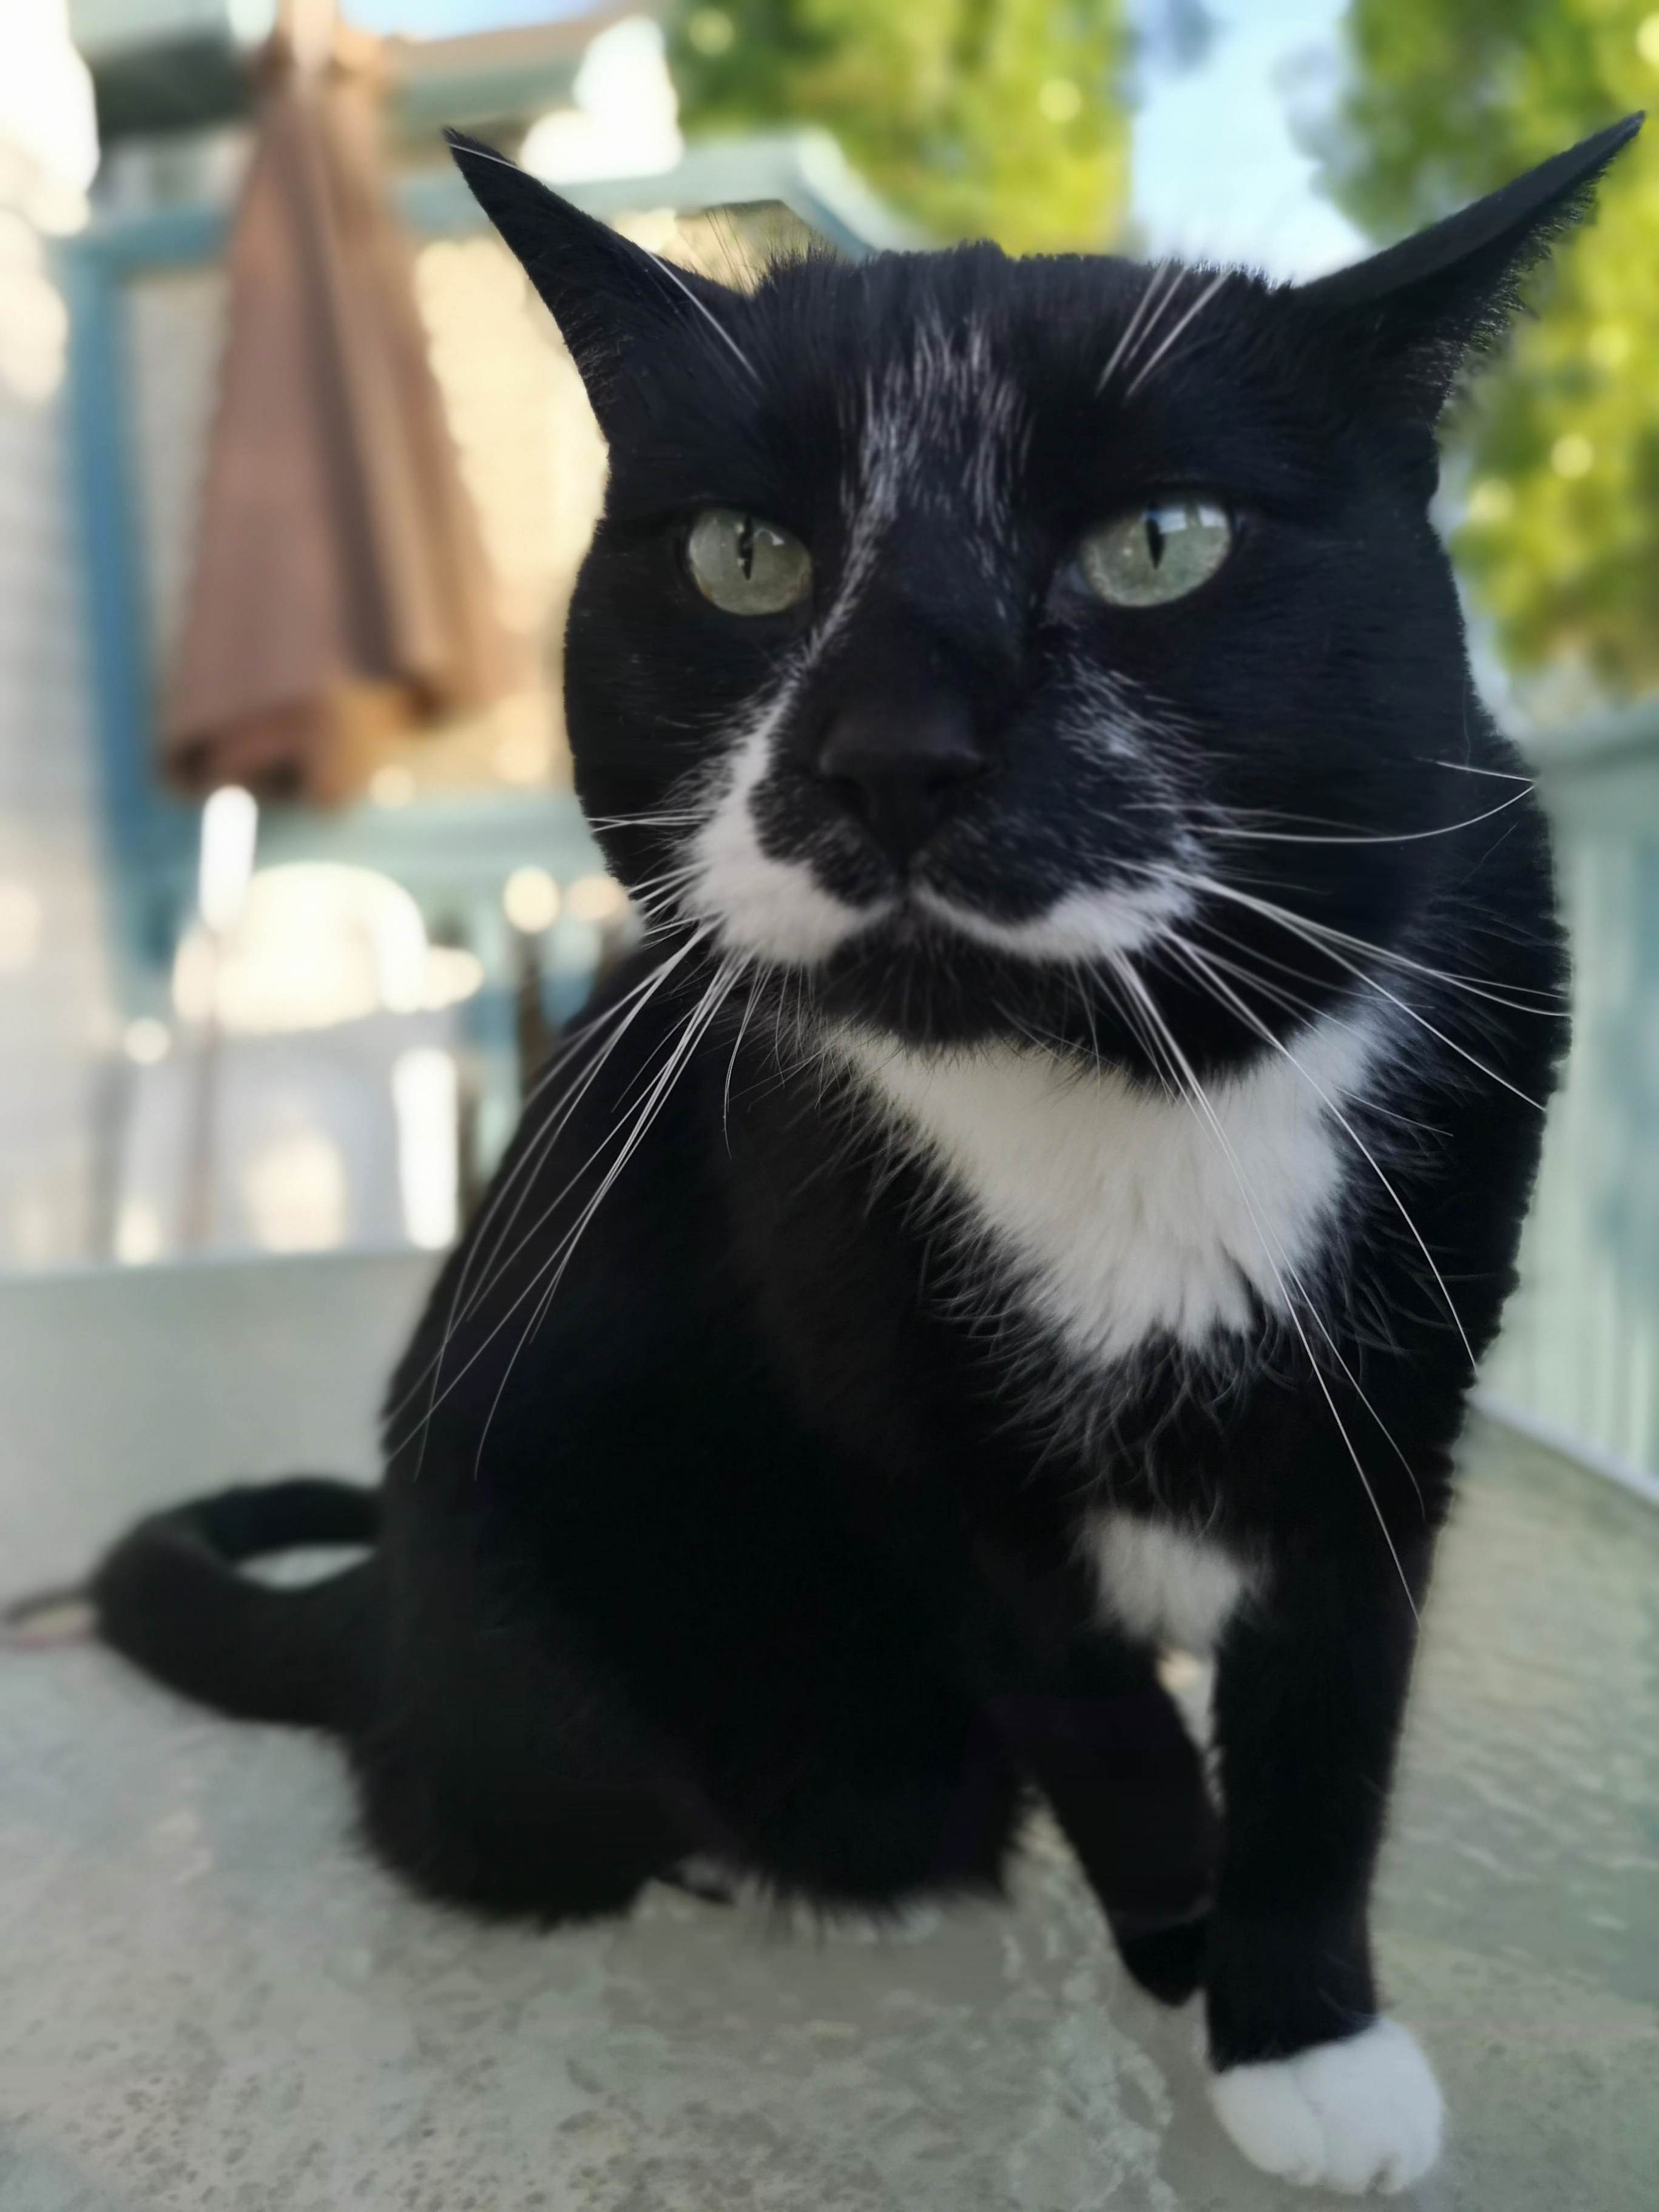 My roommates handsome asshole sylvester